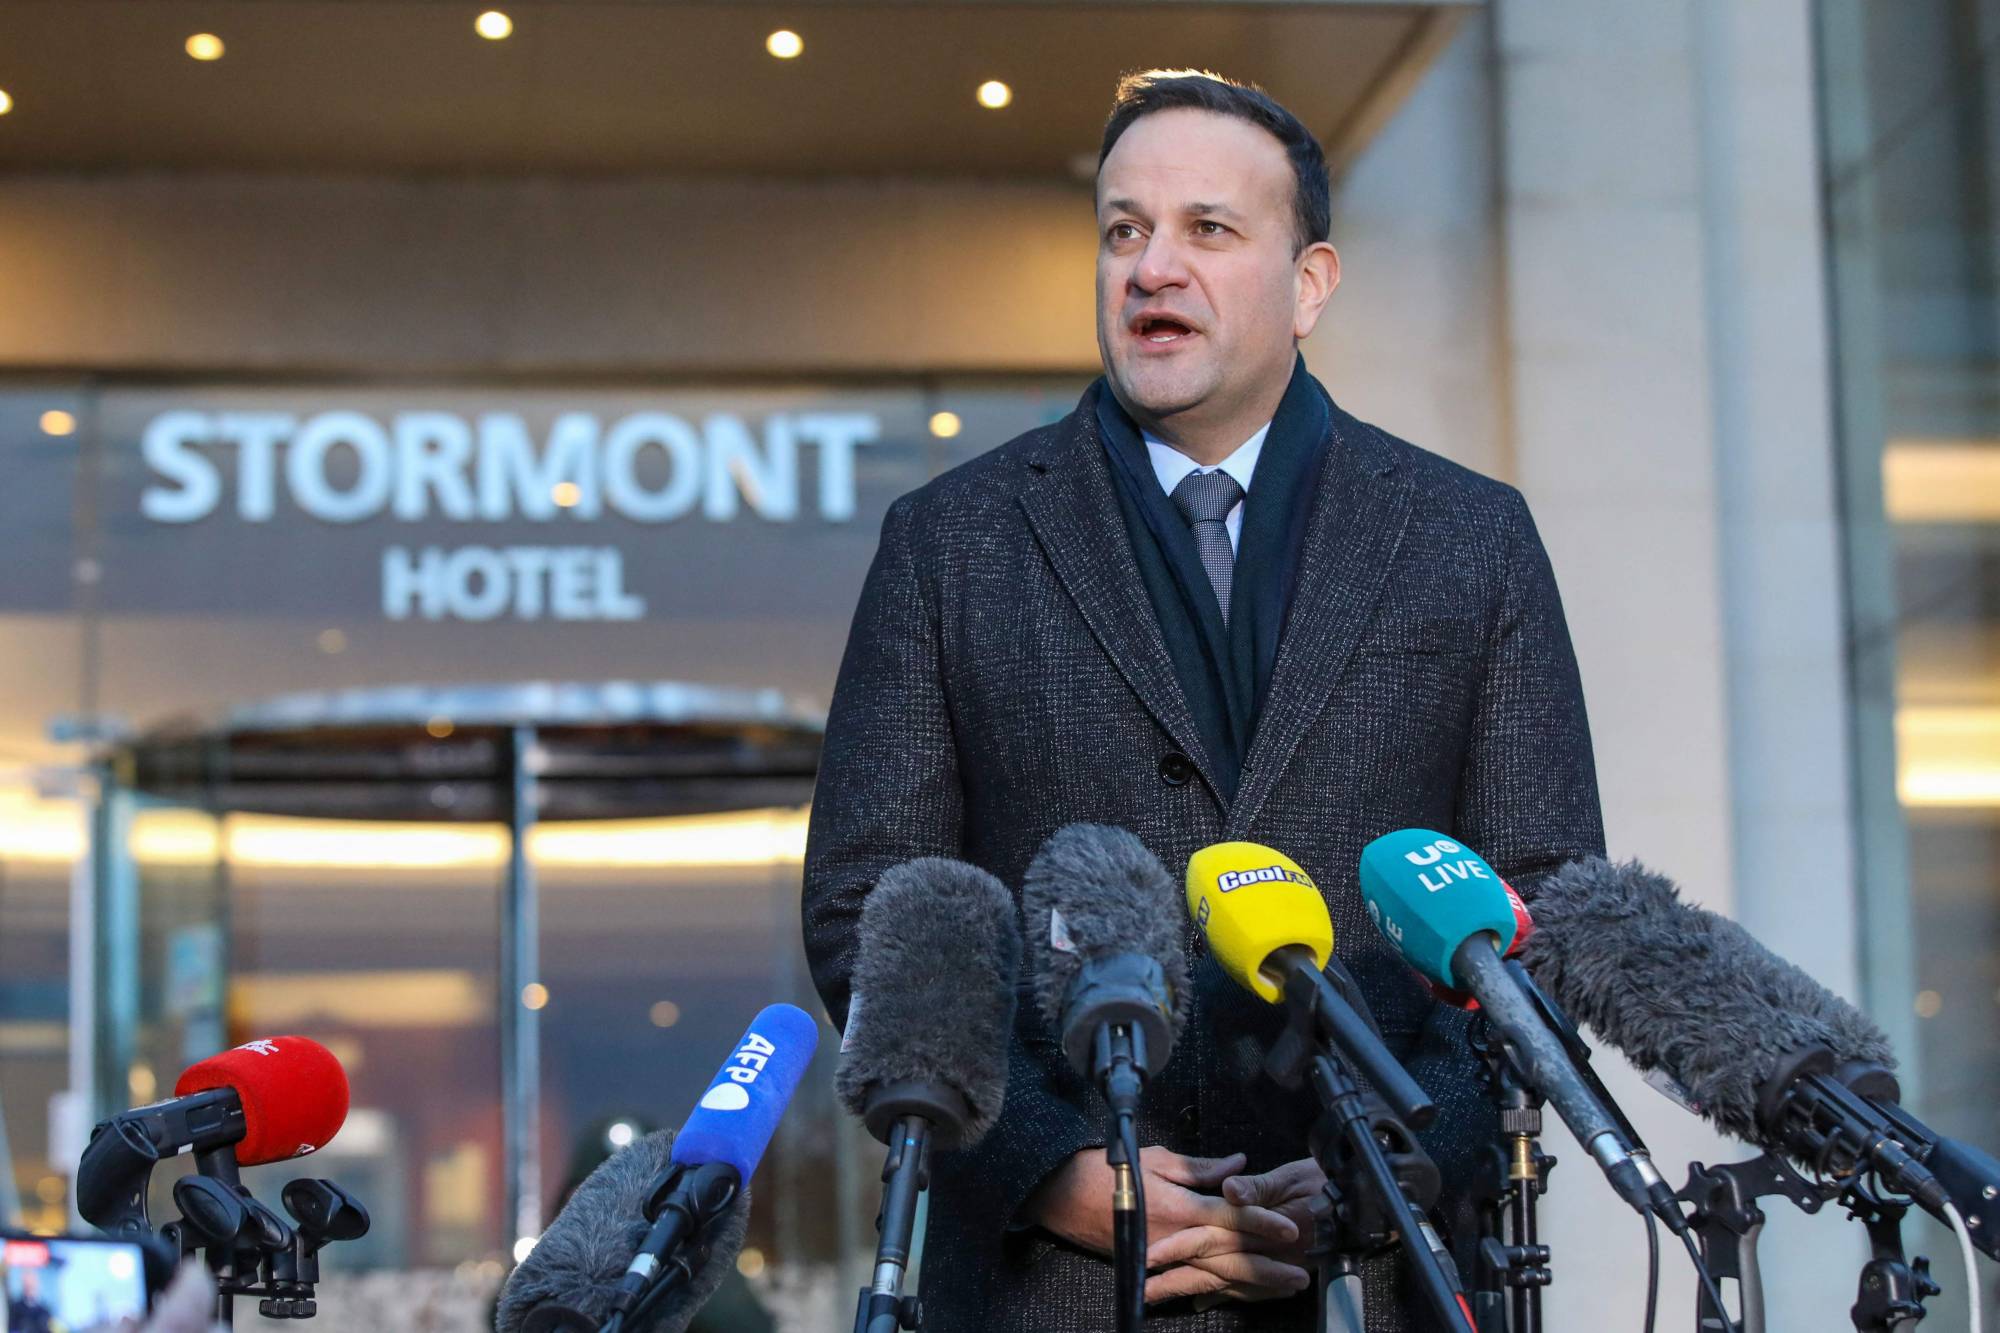 Irish Prime Minister Leo Varadkar speaks at a press conference outside the Stormont Hotel after a day of political talks in Belfast on Thursday. Varadkar held meetings with Northern Ireland's political leaders after Britain's Foreign Secretary James Cleverly met Northern Ireland politicians to try to break months of political deadlock over post-Brexit trading rules and end a boycott of the power-sharing assembly in Belfast. | AFP-JIJI